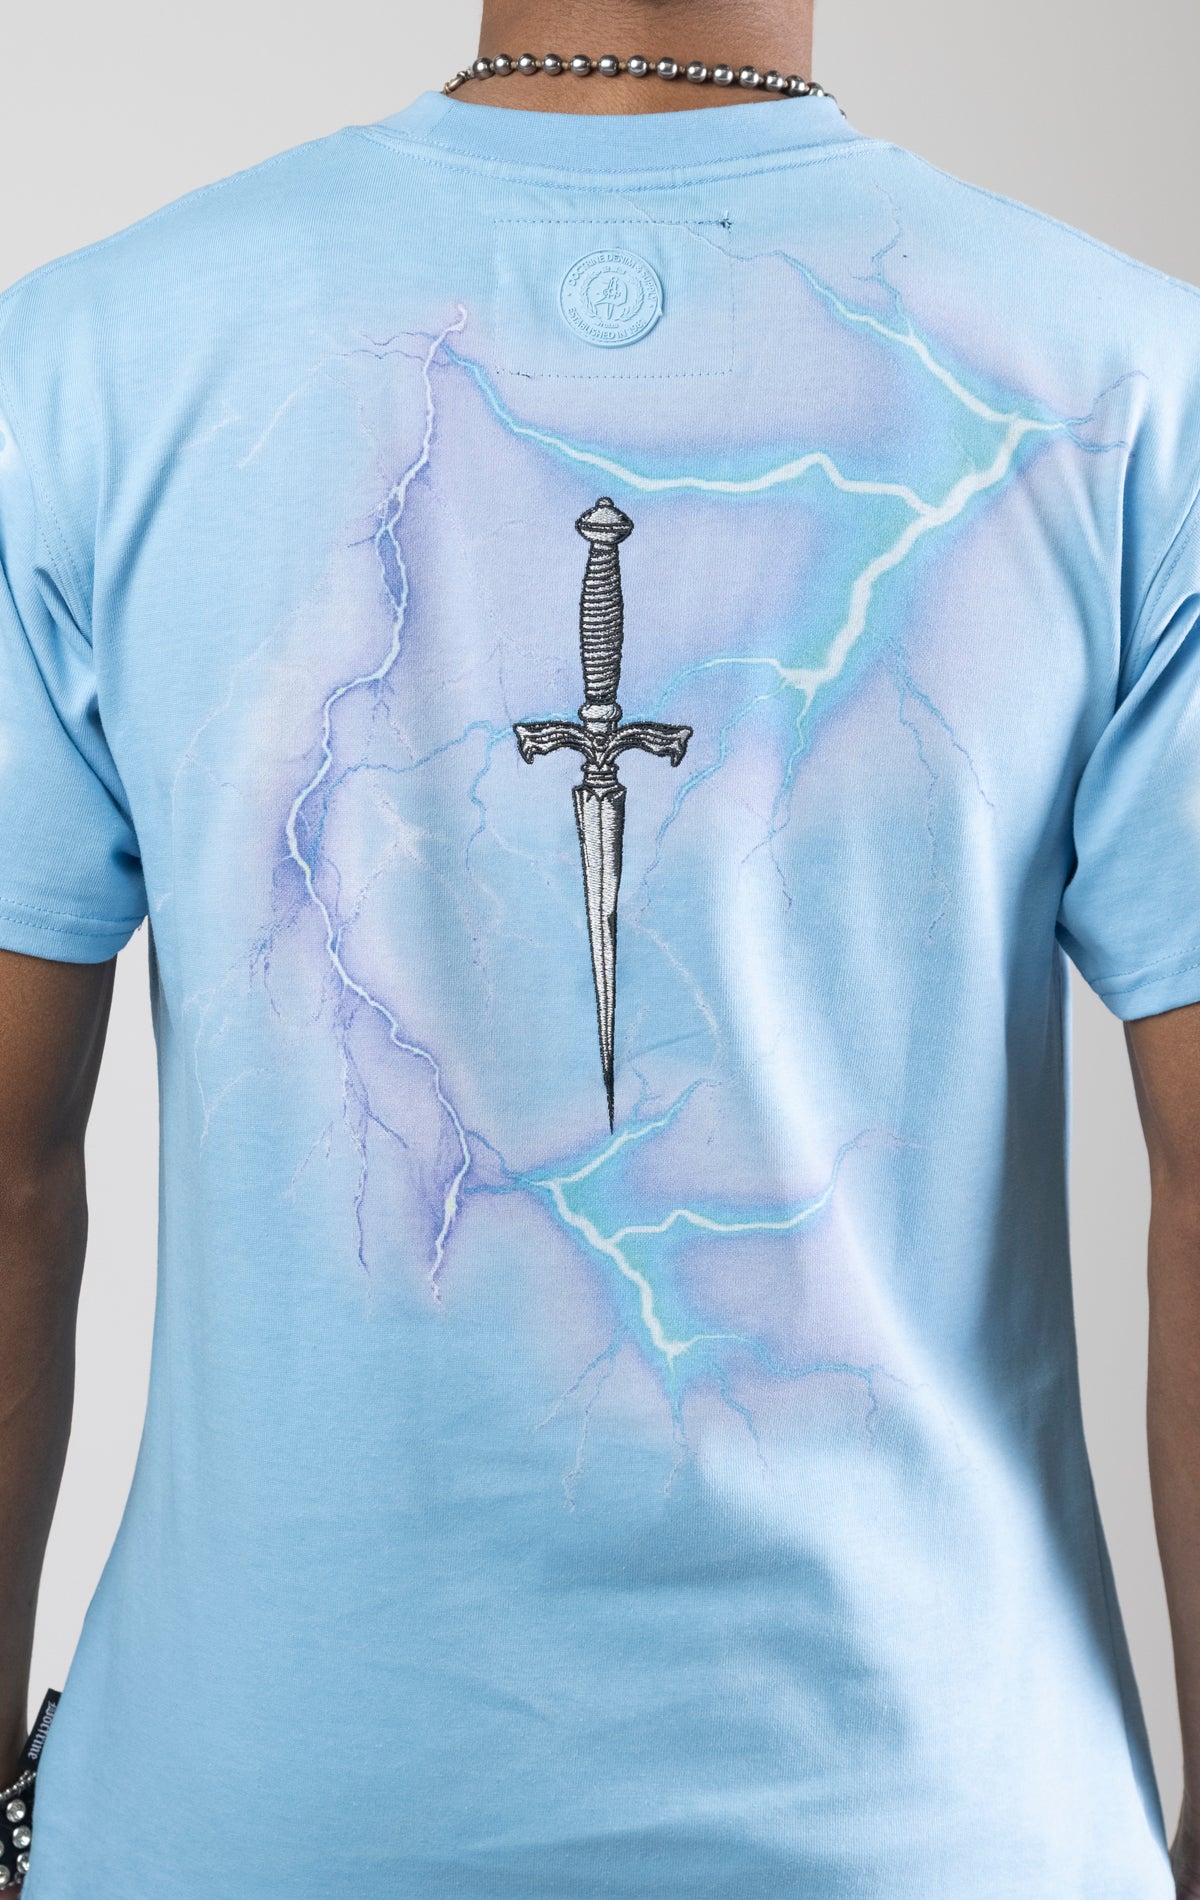 Sky blue t-shirt with a digital photo print on the front and back, embroidered text on the front, and a 3D metallic dagger embroidered on the back.